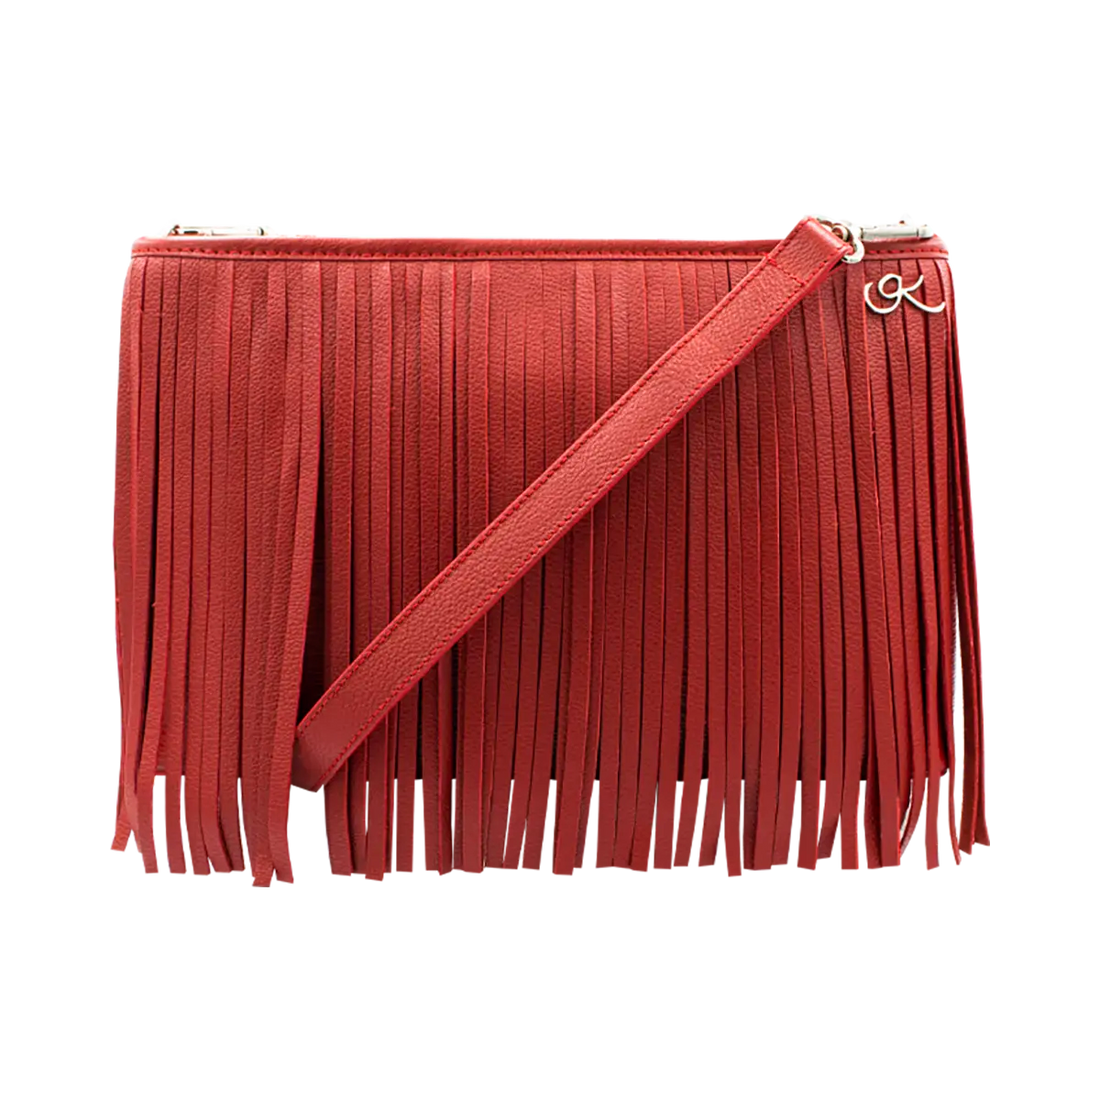 red small black leather crossbody bag with fringe. Fashion accessory for women in San Diego, CA.